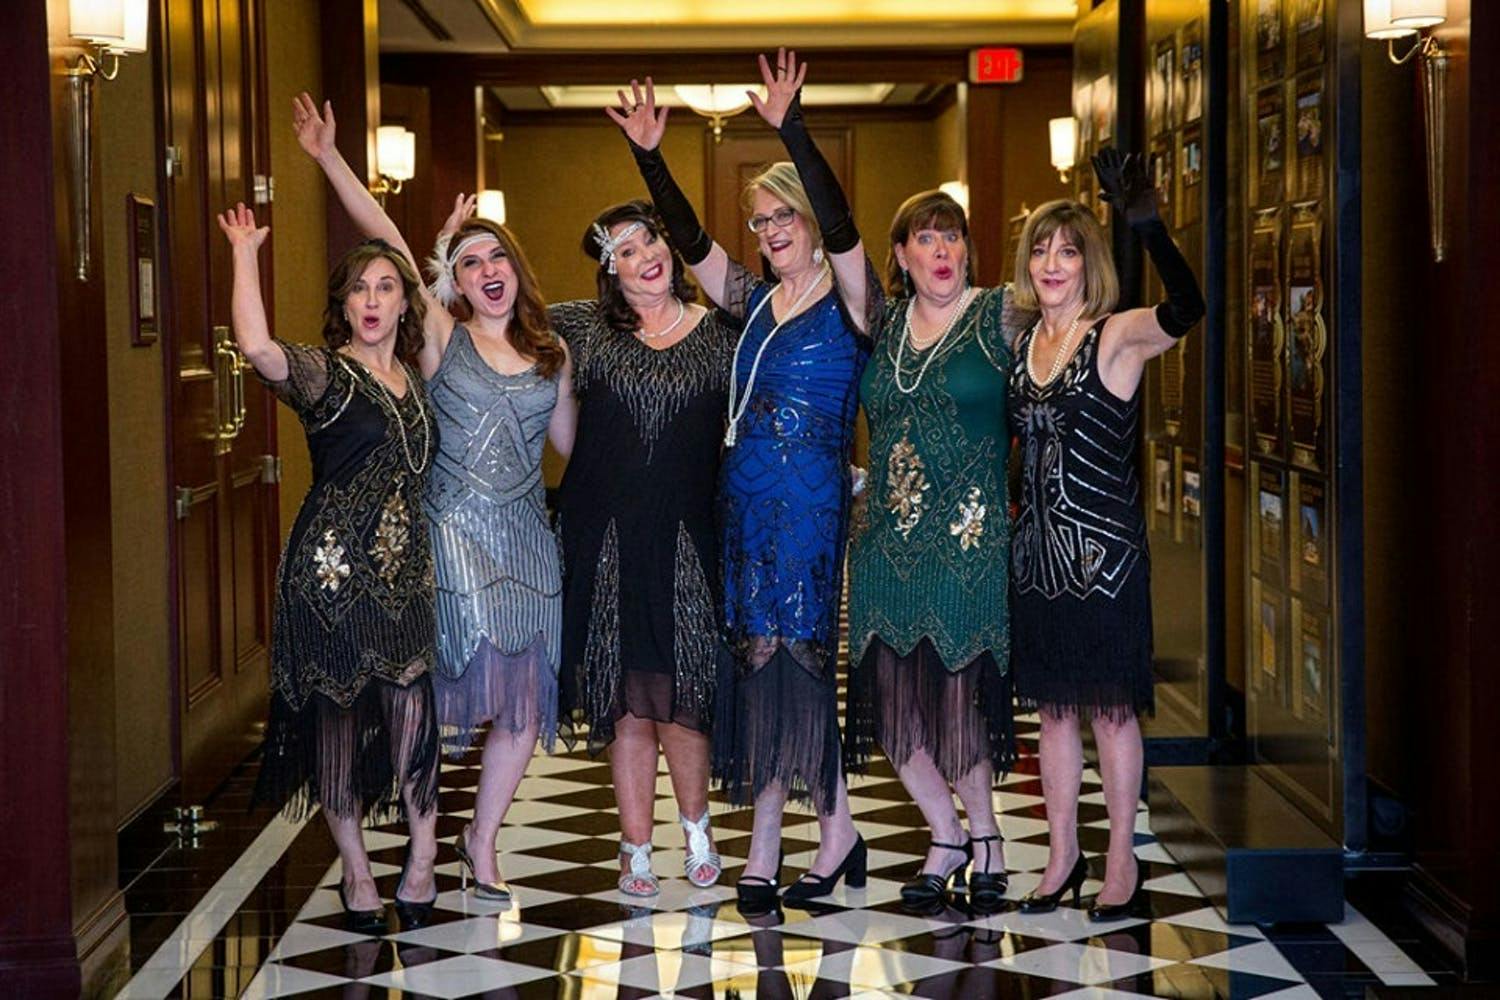 SIX GUESTS IN FLAPPER ATTIRE AT IMPACT MELANOMA'S SHADES OF HOPE GALA 2019 AT THE COLONNADE IN BOSTON, MASSACHUSETTS | PARTYSLATE